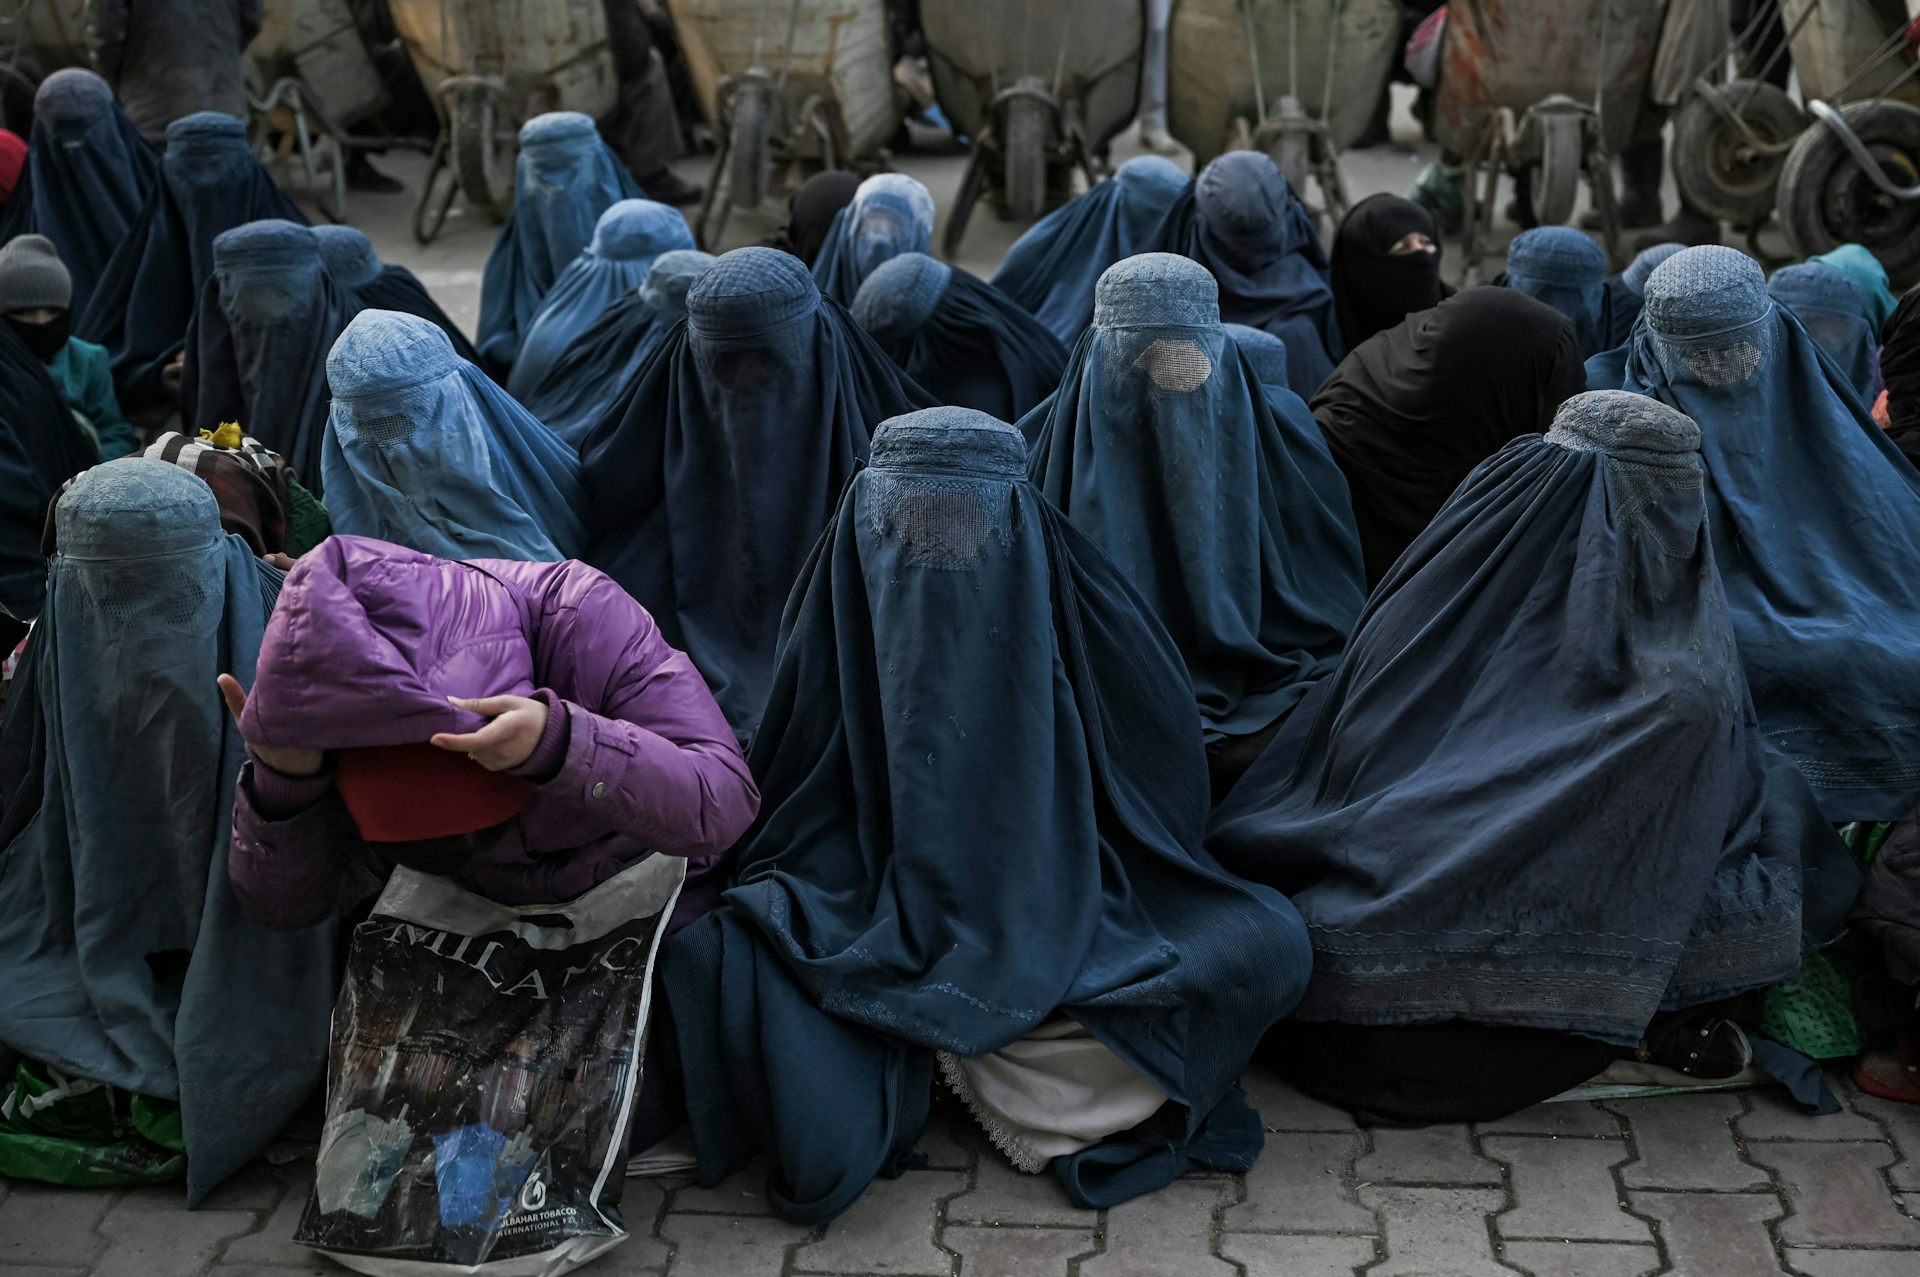 Afghan women face increasing violence and repression under the Taliban after international spotlight fades photo pic